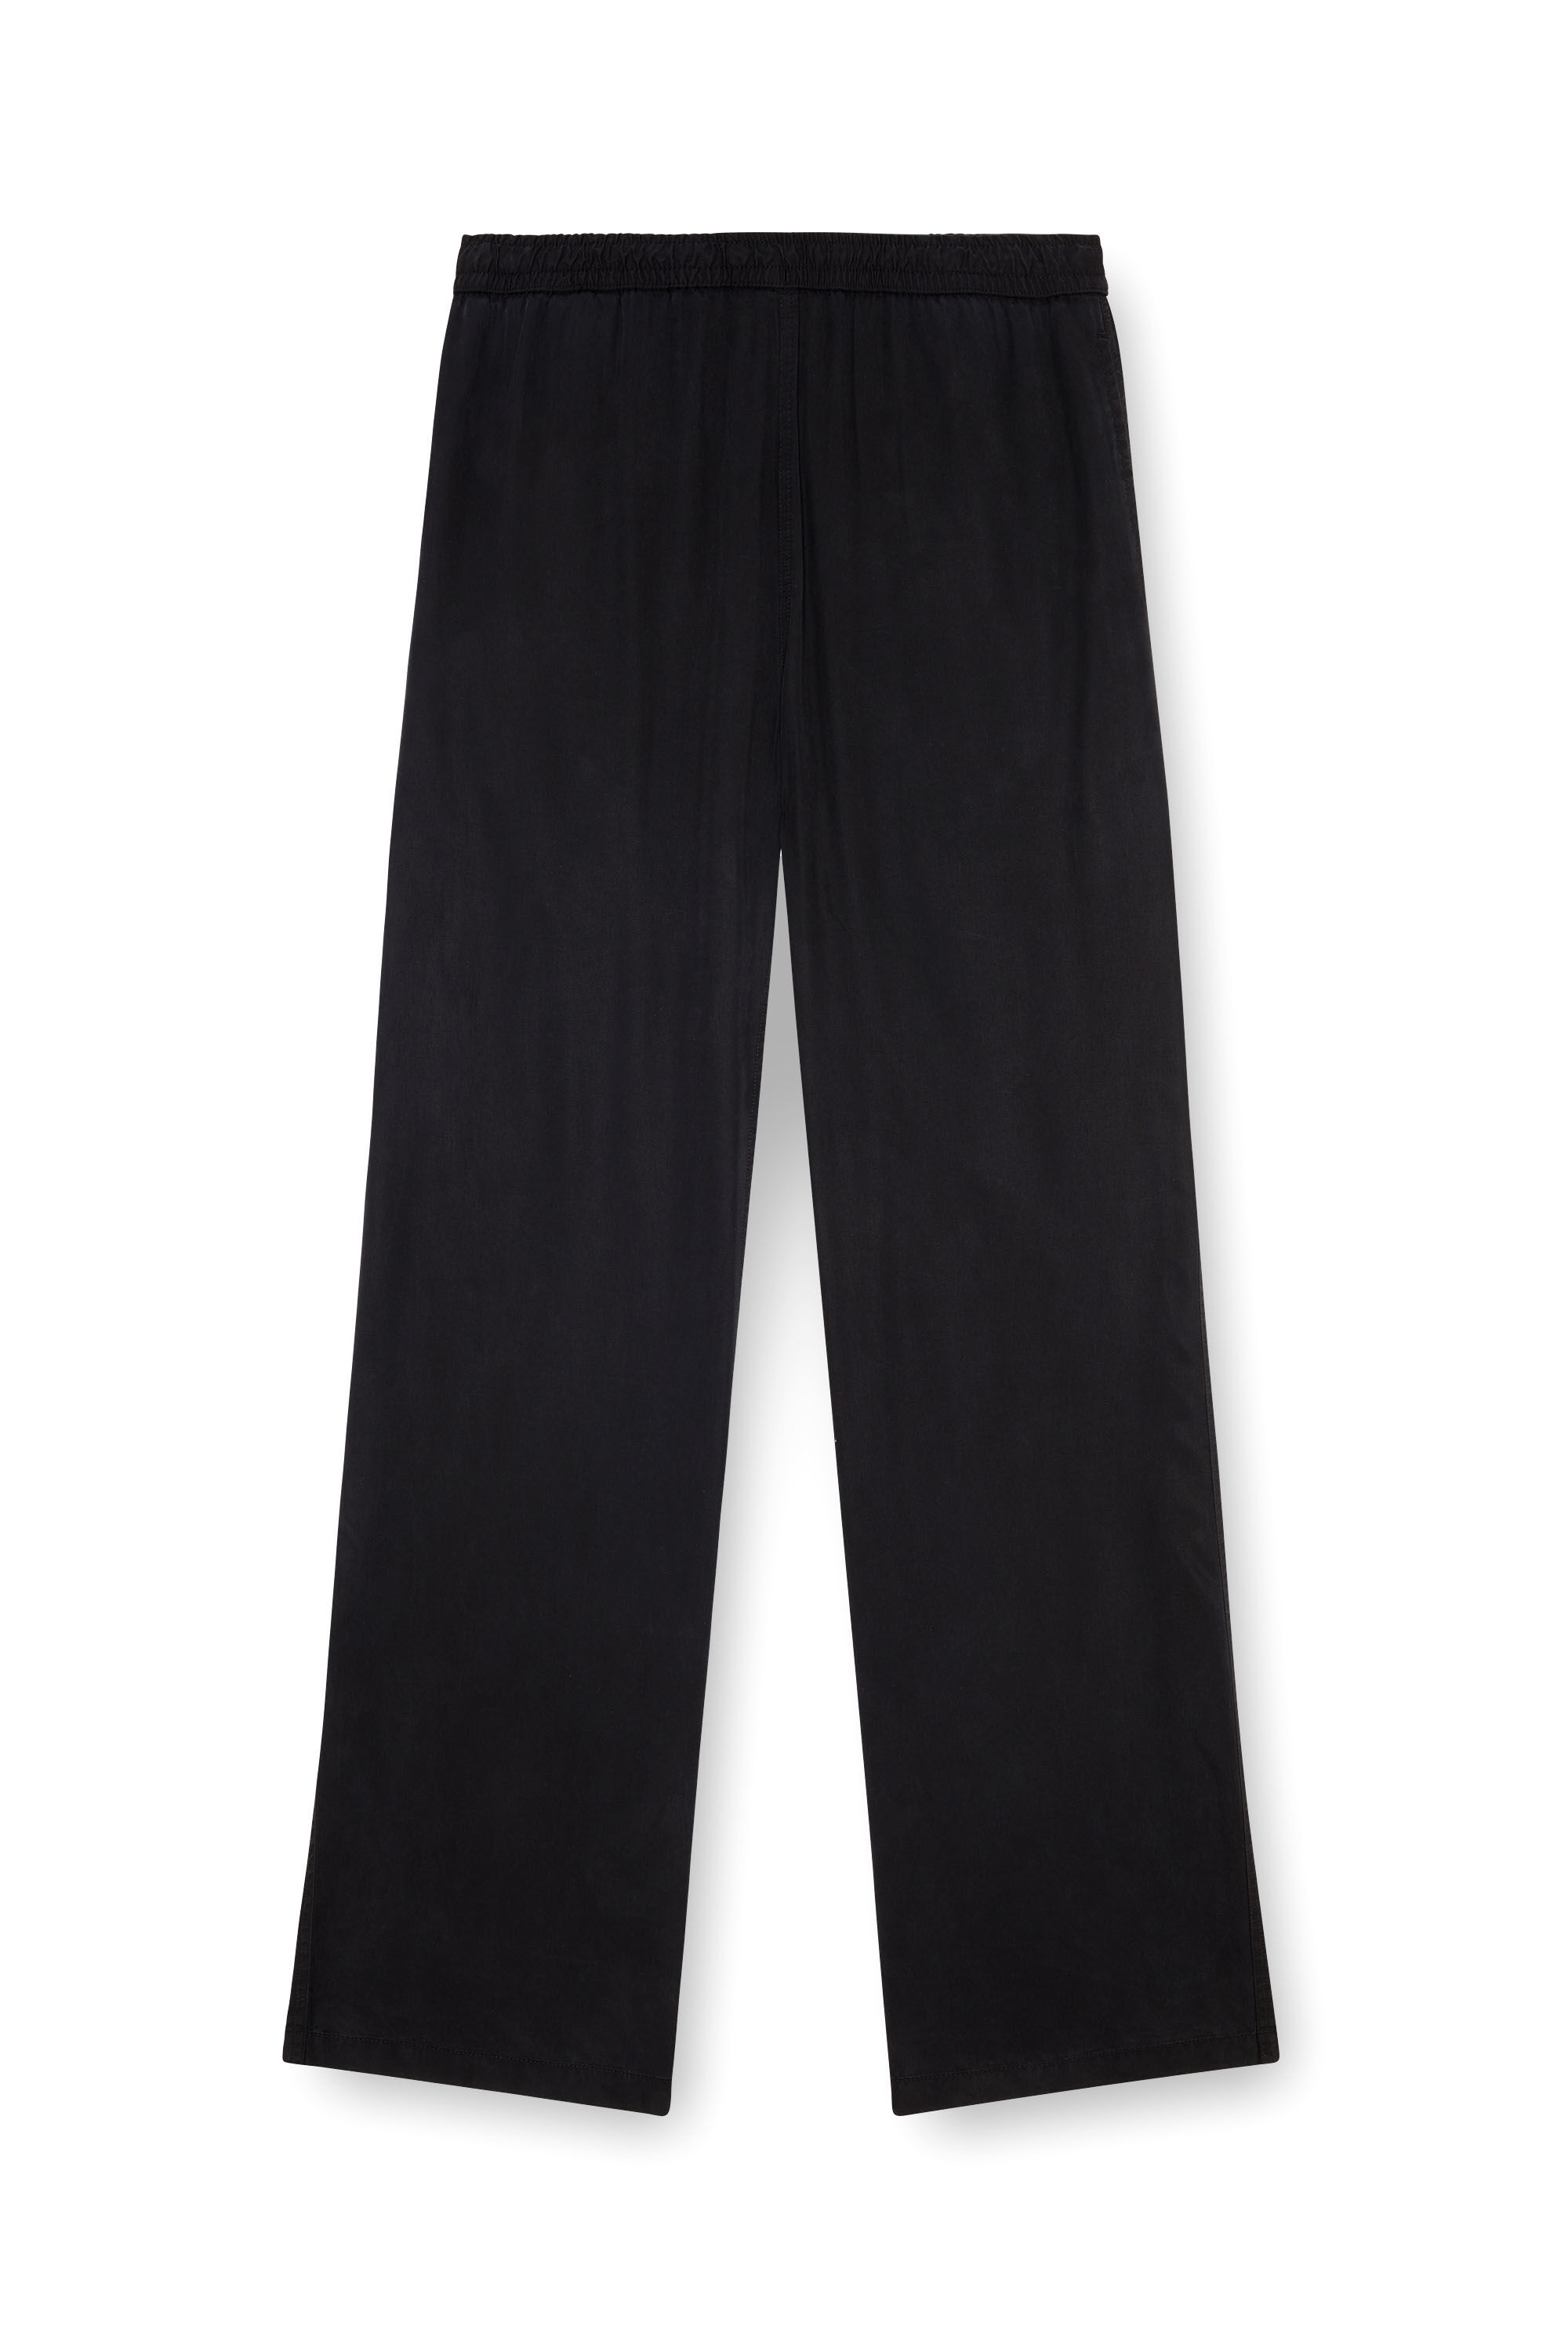 Diesel - P-DREYER-C, Male Drawstring pants in faded twill in ブラック - Image 4